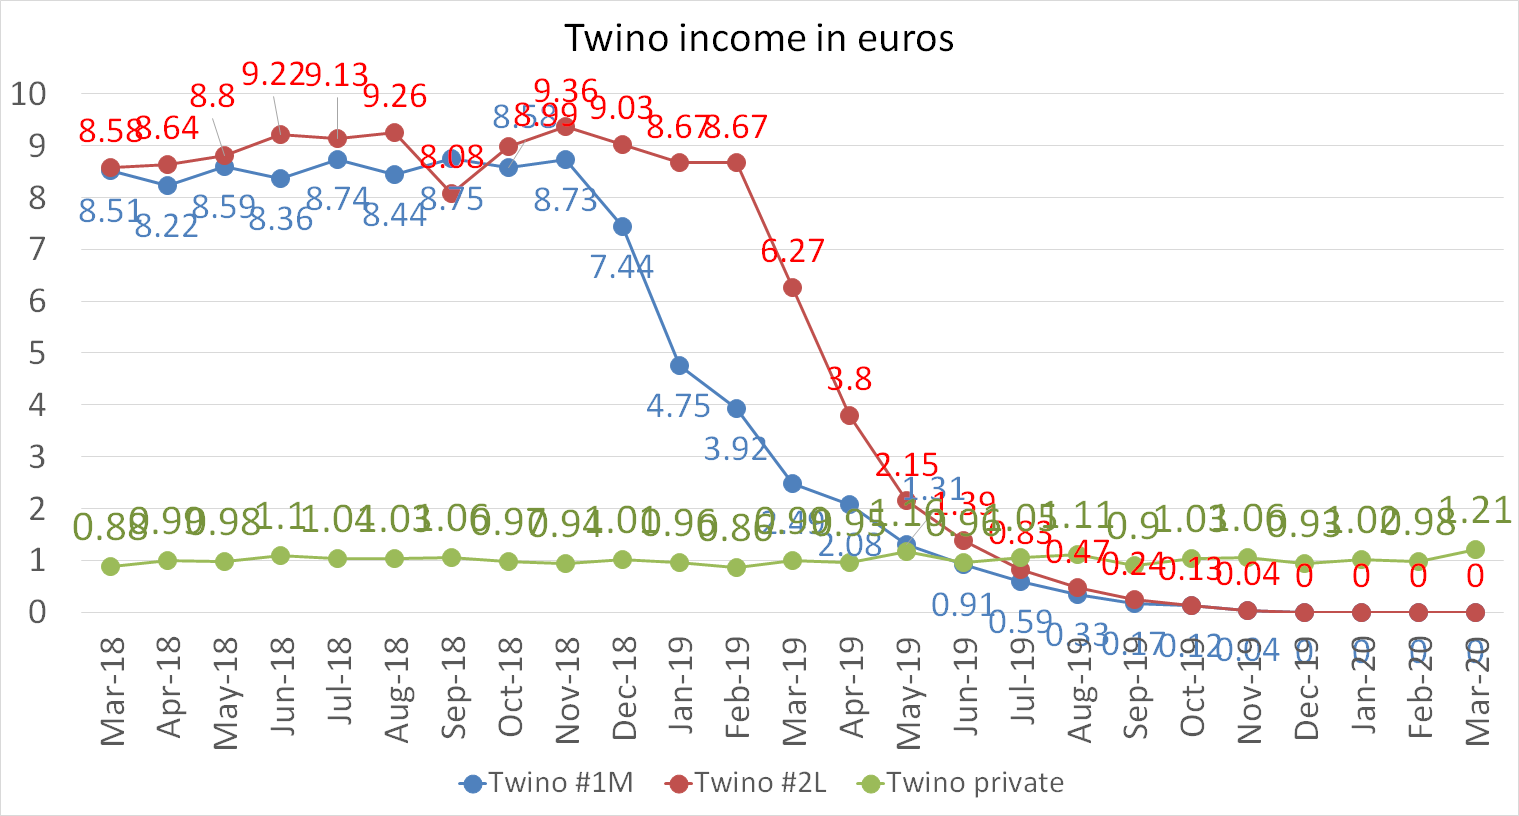 Twino income in euros in march 2020